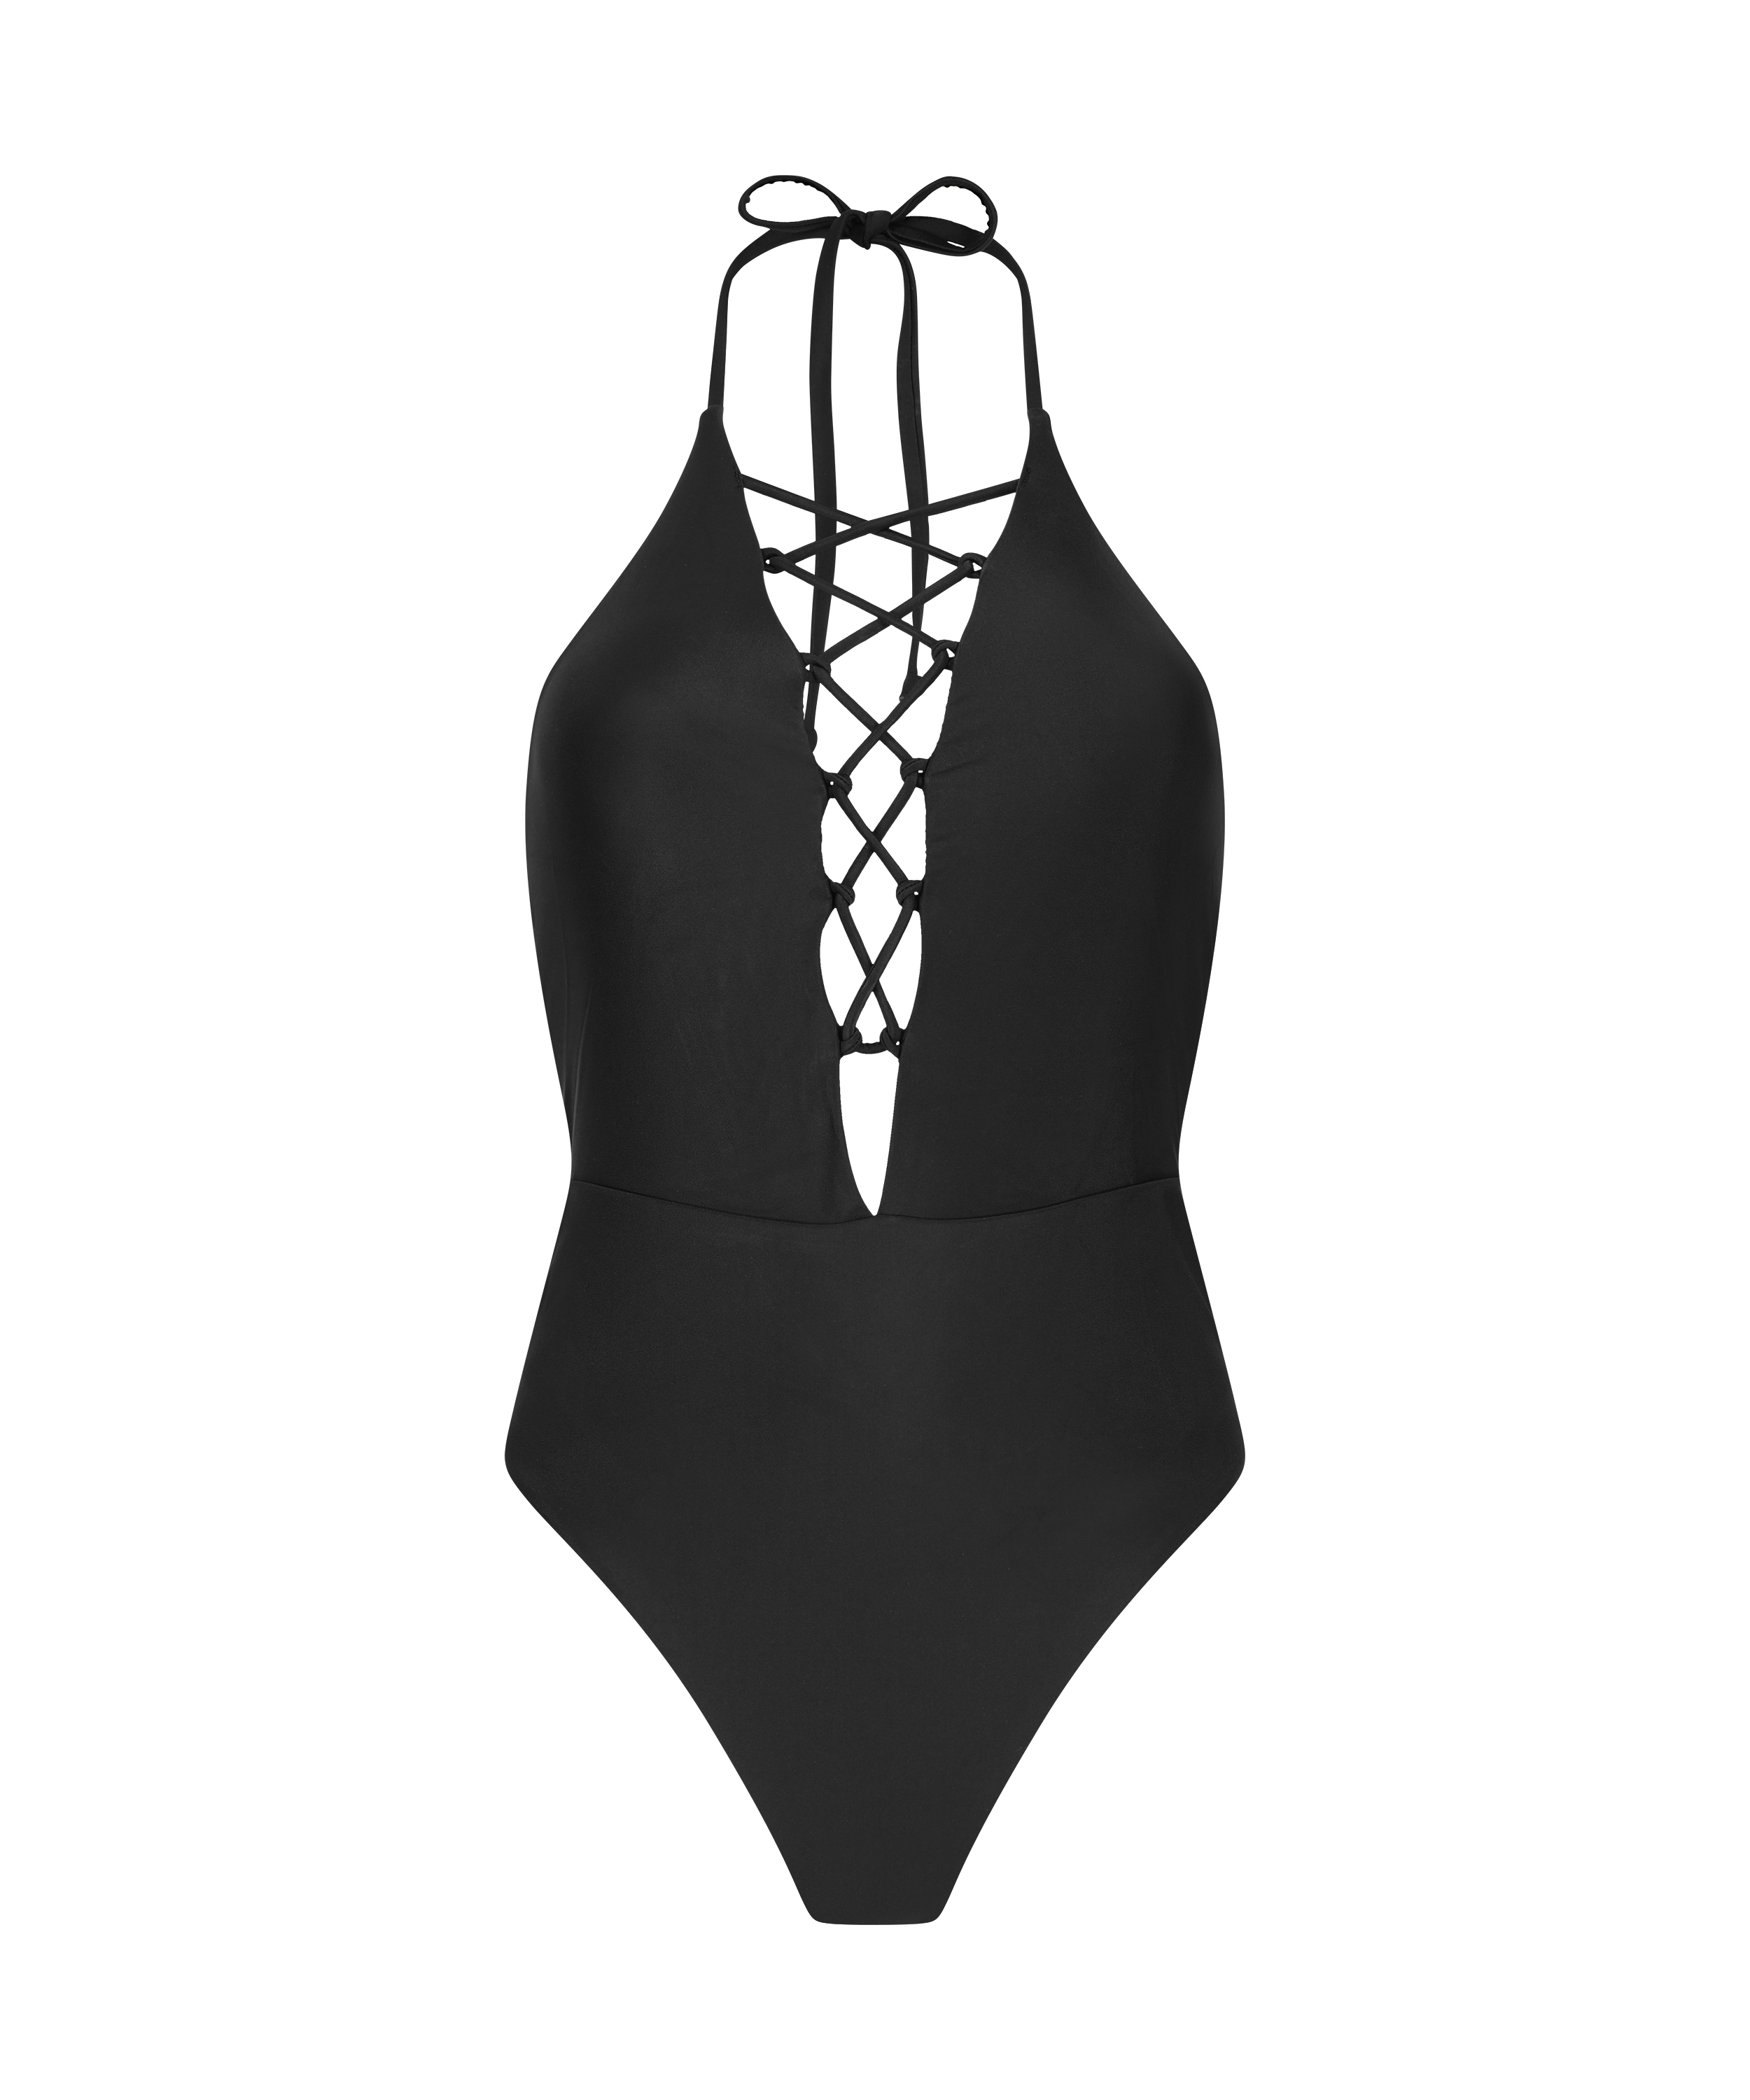 Spicey Swimsuit for £37 - Swimsuits - Hunkemöller